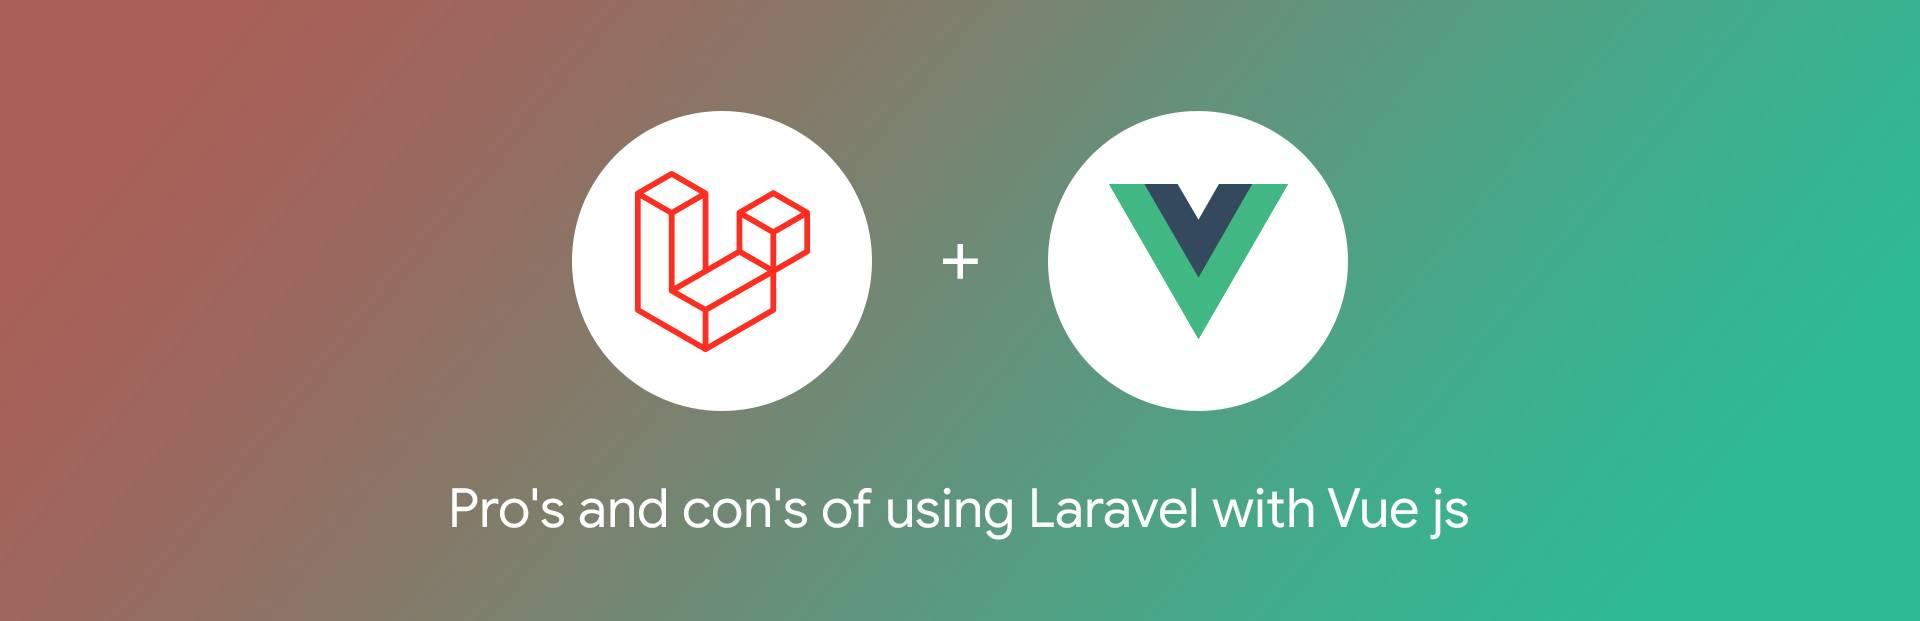 Pros and cons of using Laravel with Vue js